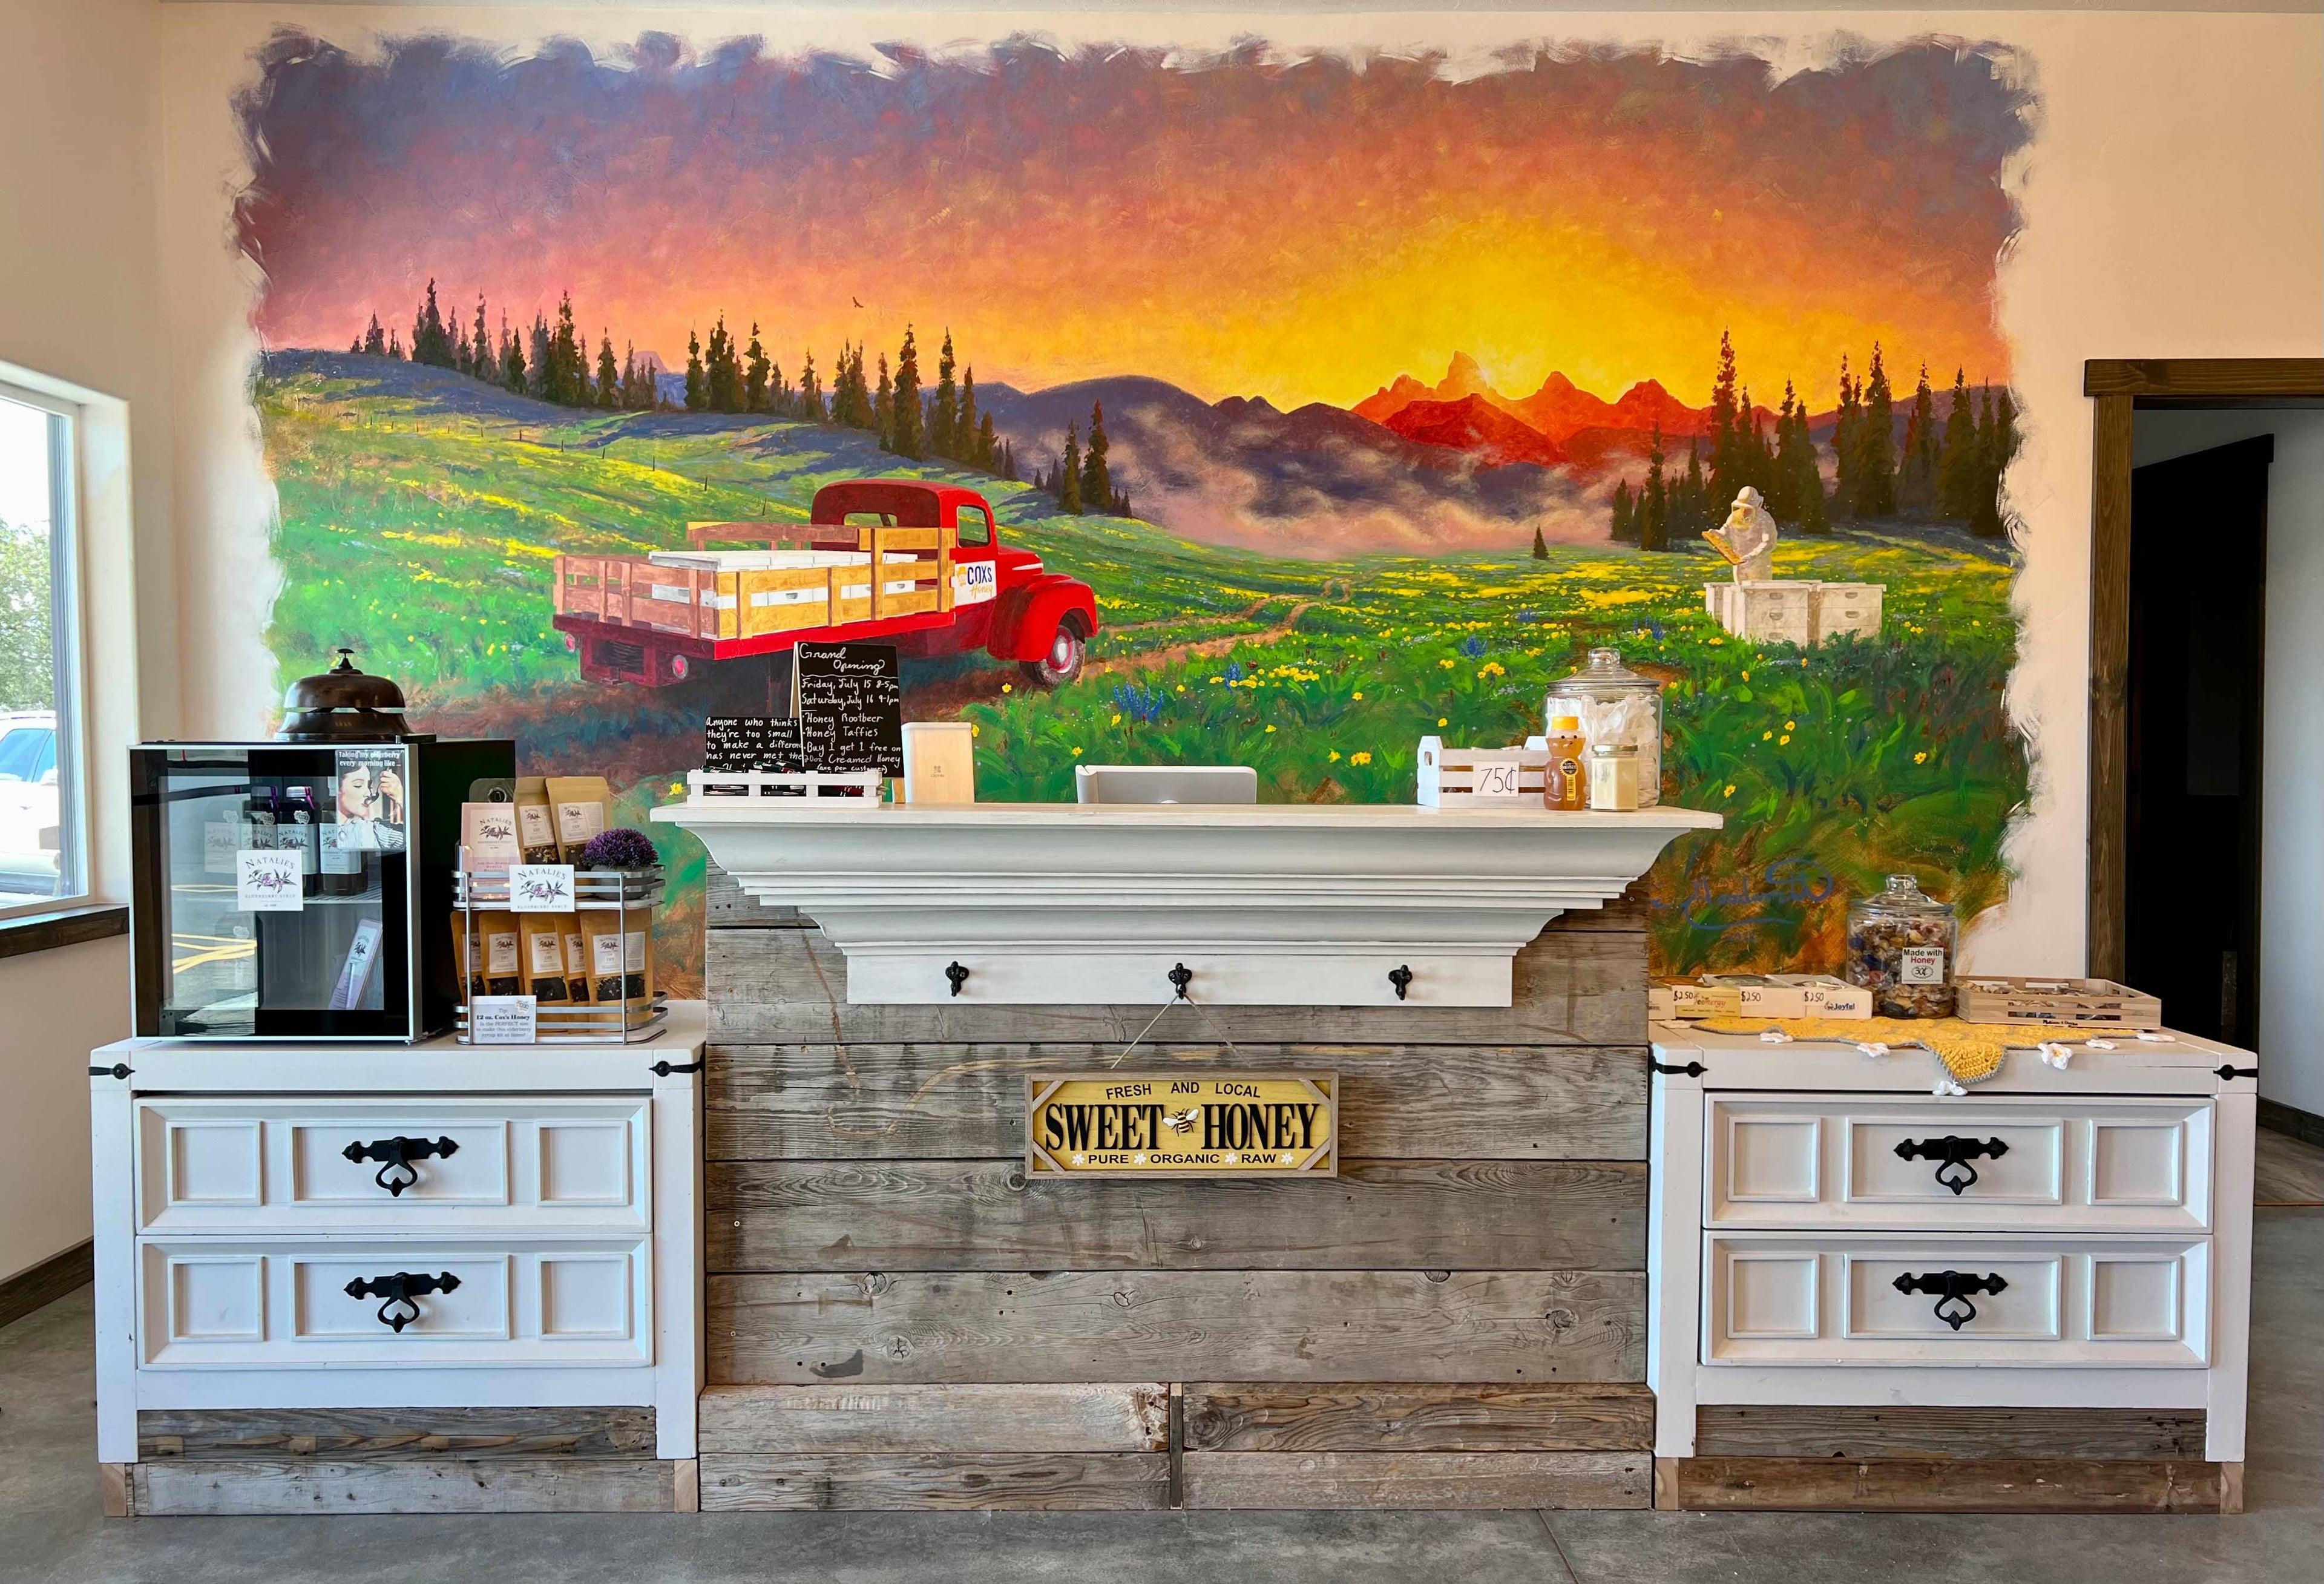 Coxs Honey checkout stand at our current store. With a old painting on the wall of a work truck with bees hives on the bed with a guy working the bees.